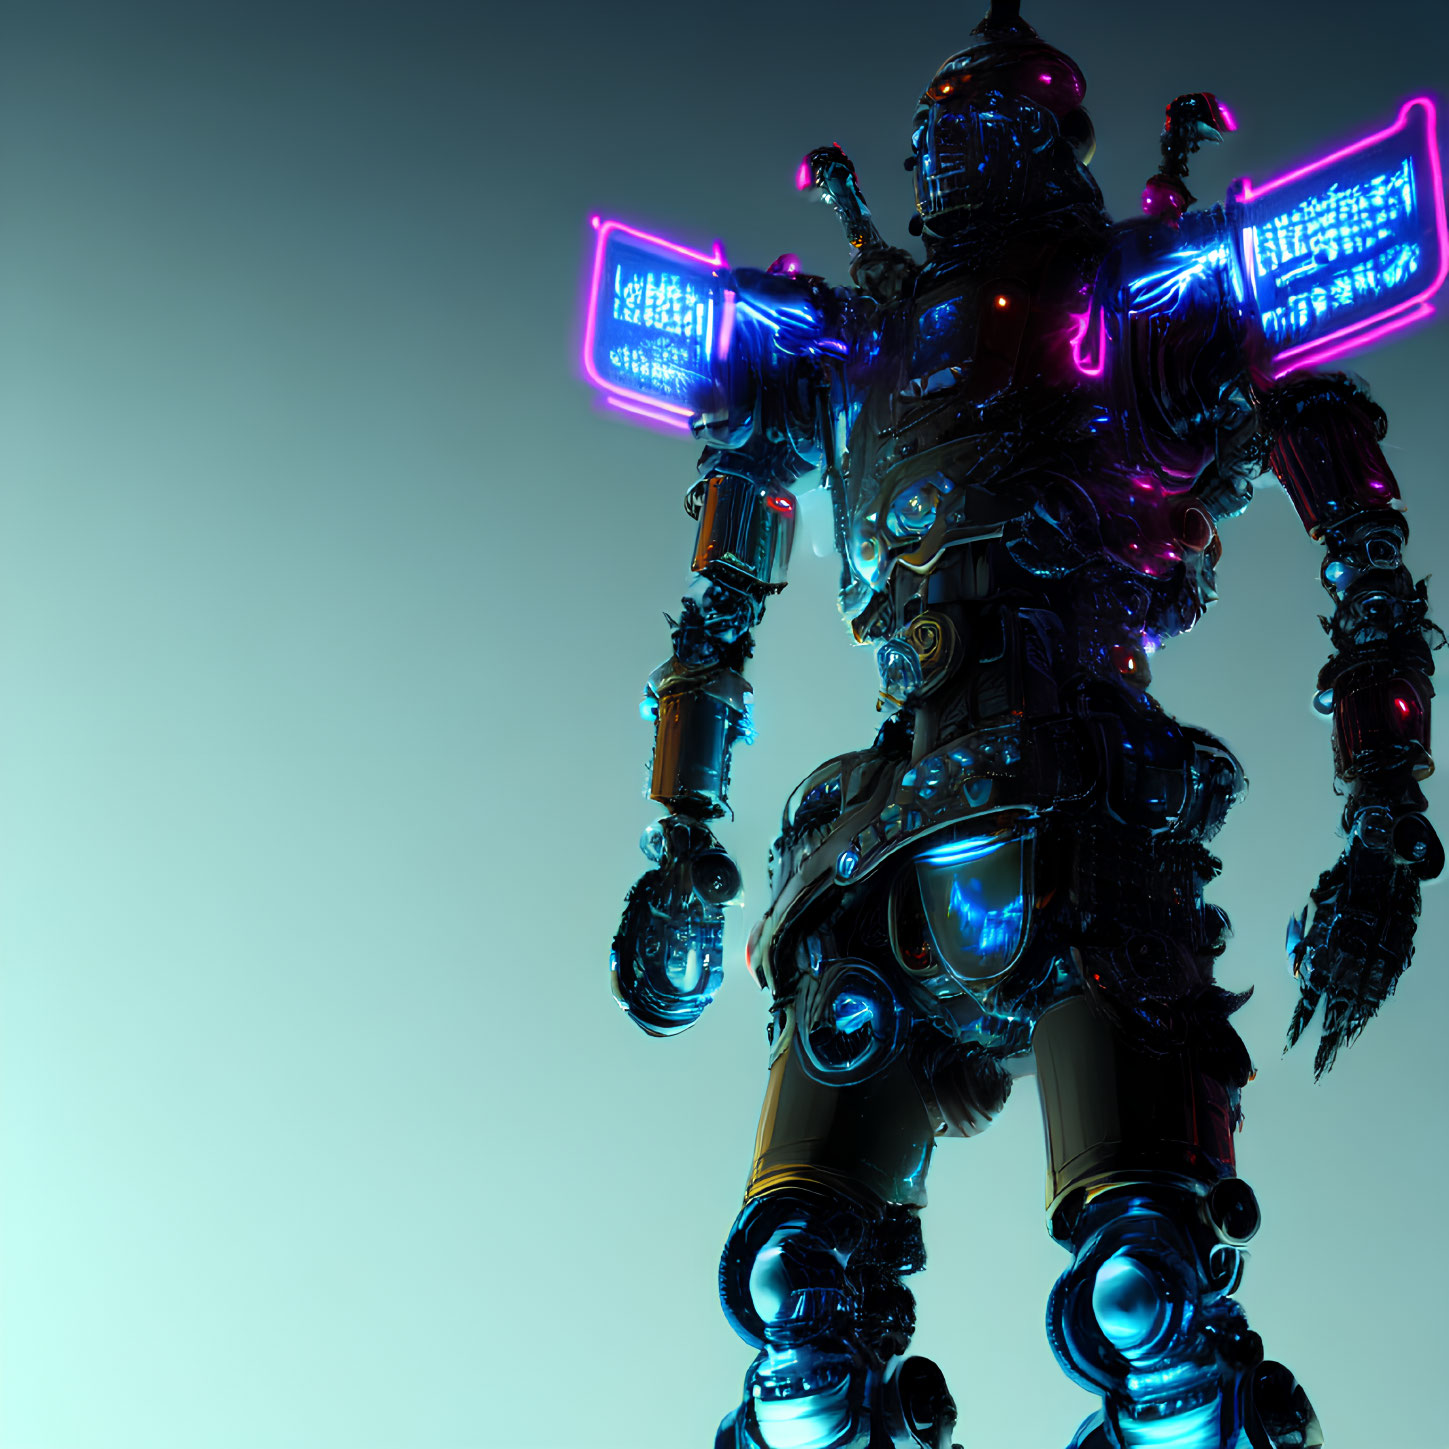 Neon Blue and Pink Futuristic Robot on Gradient Blue Background